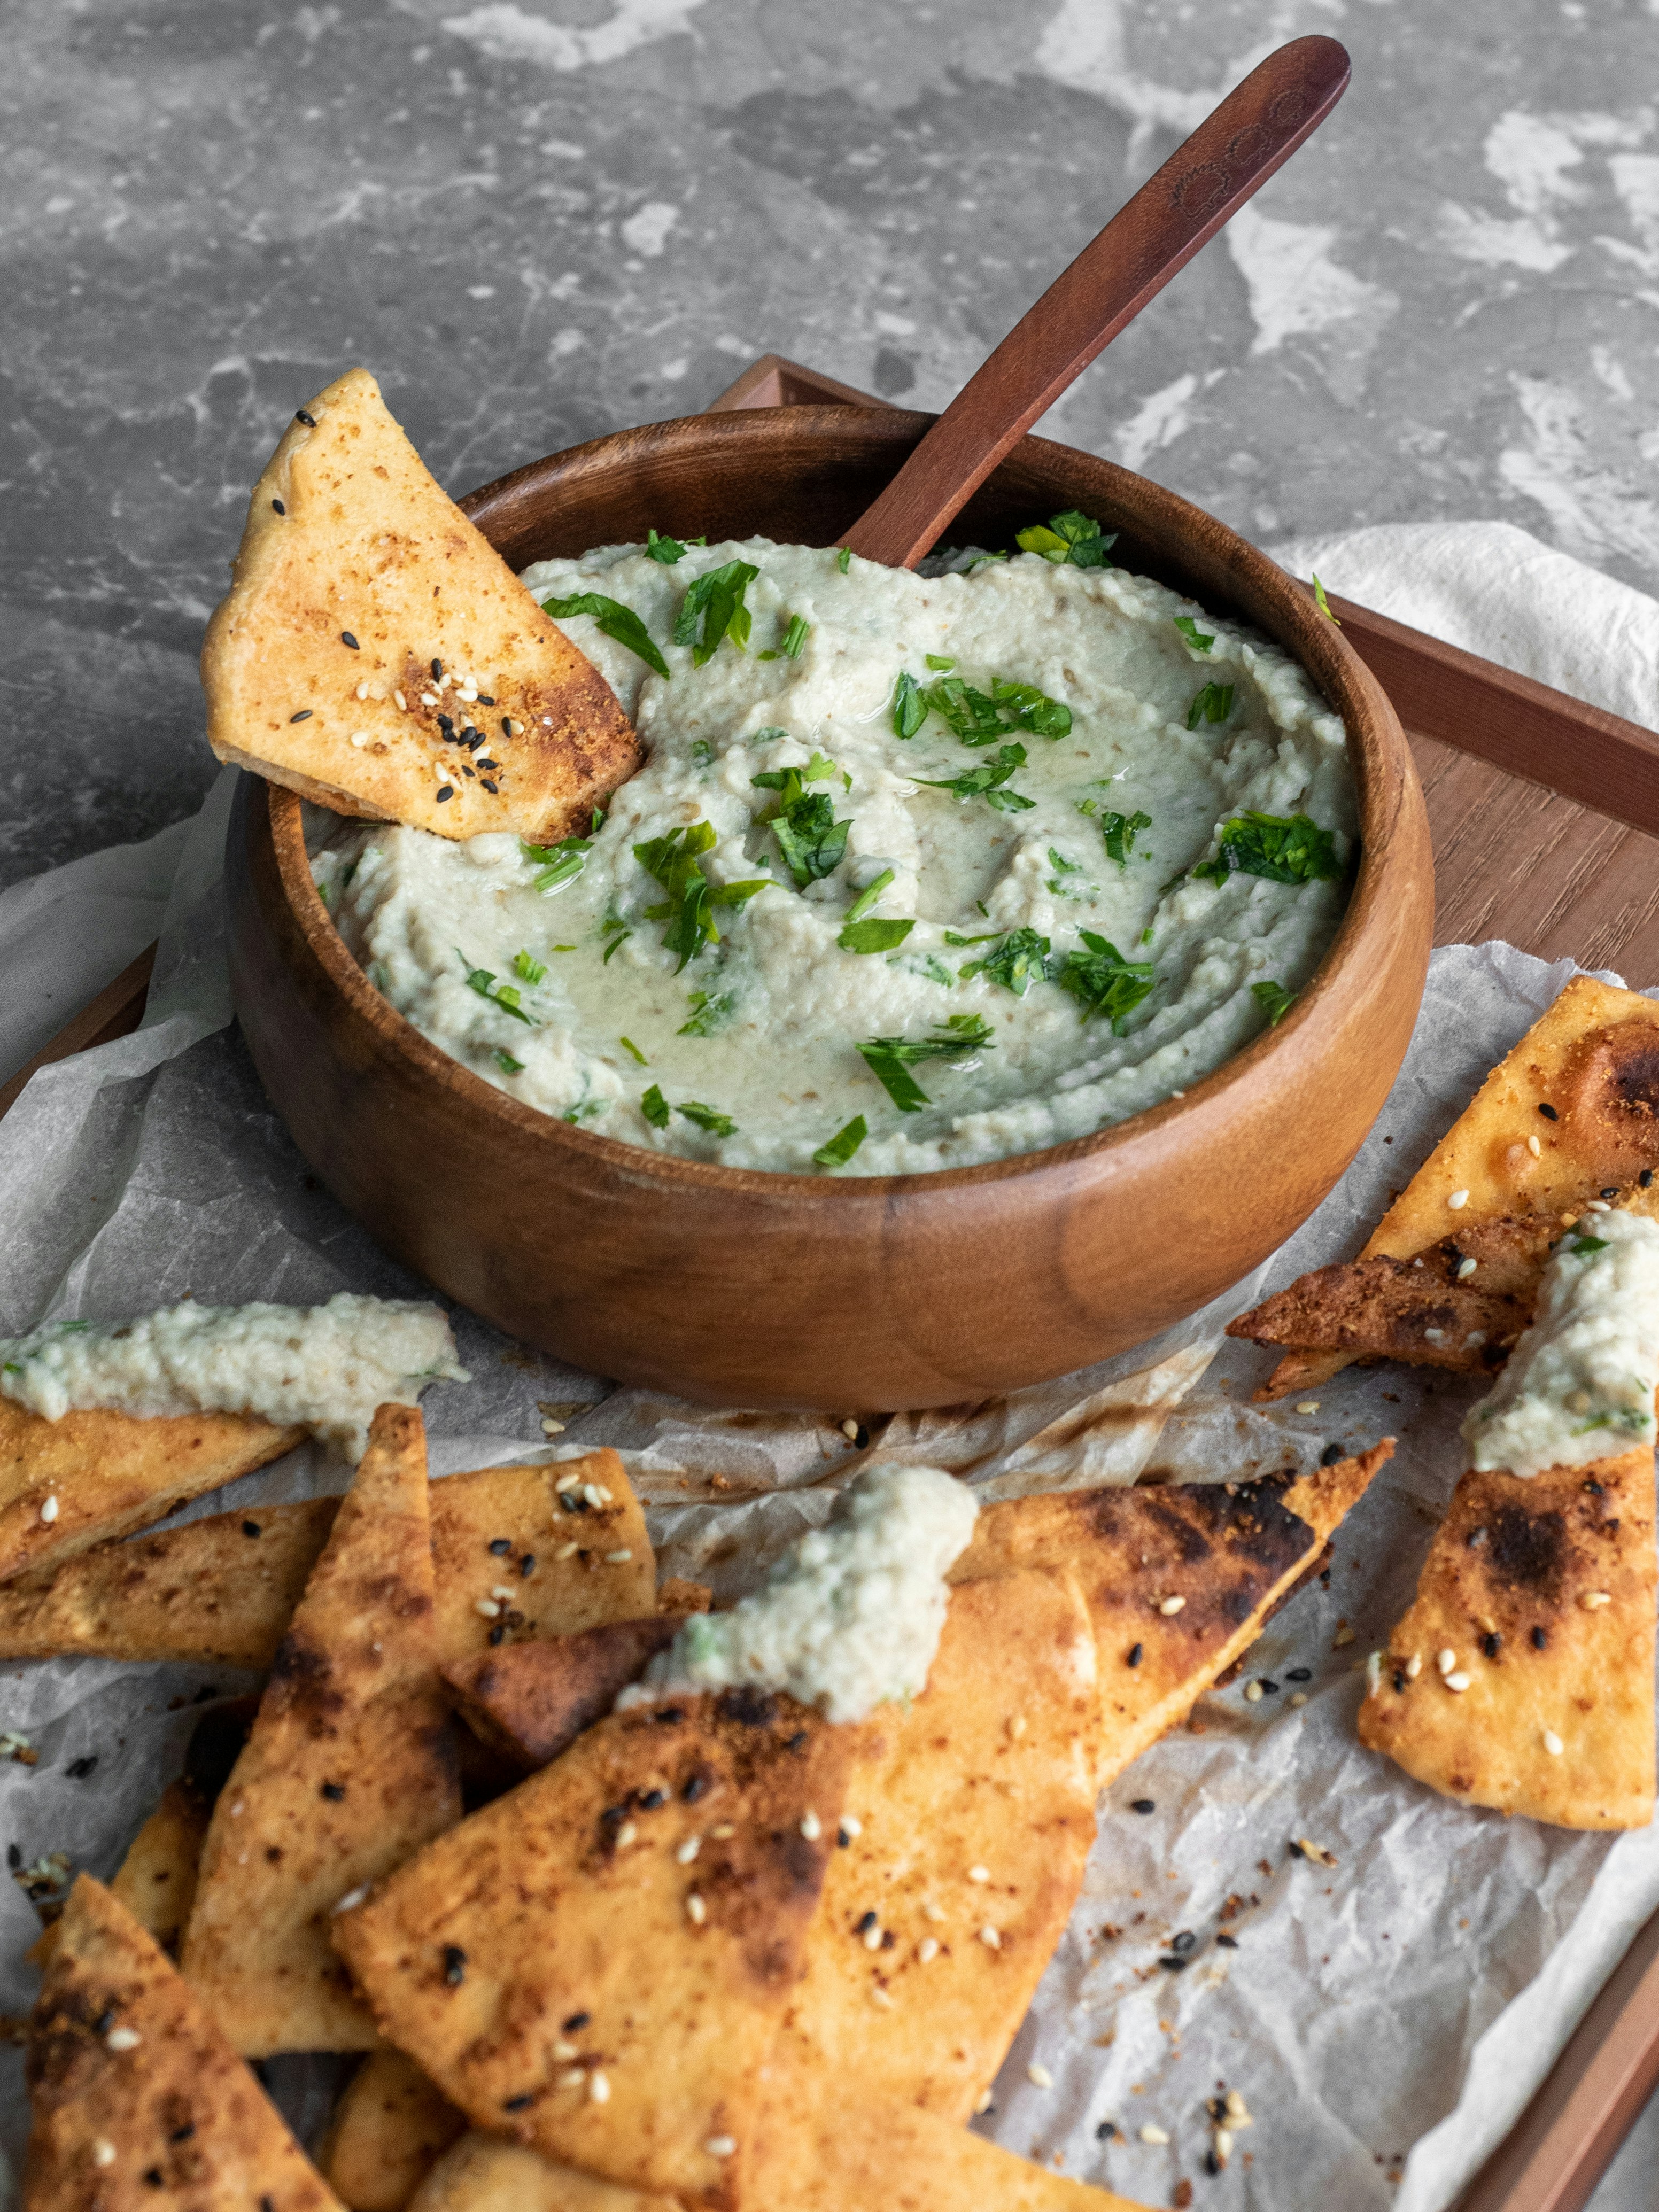 A wooden bowl filled with baba ganoush topped with herbs and a pita wedge.